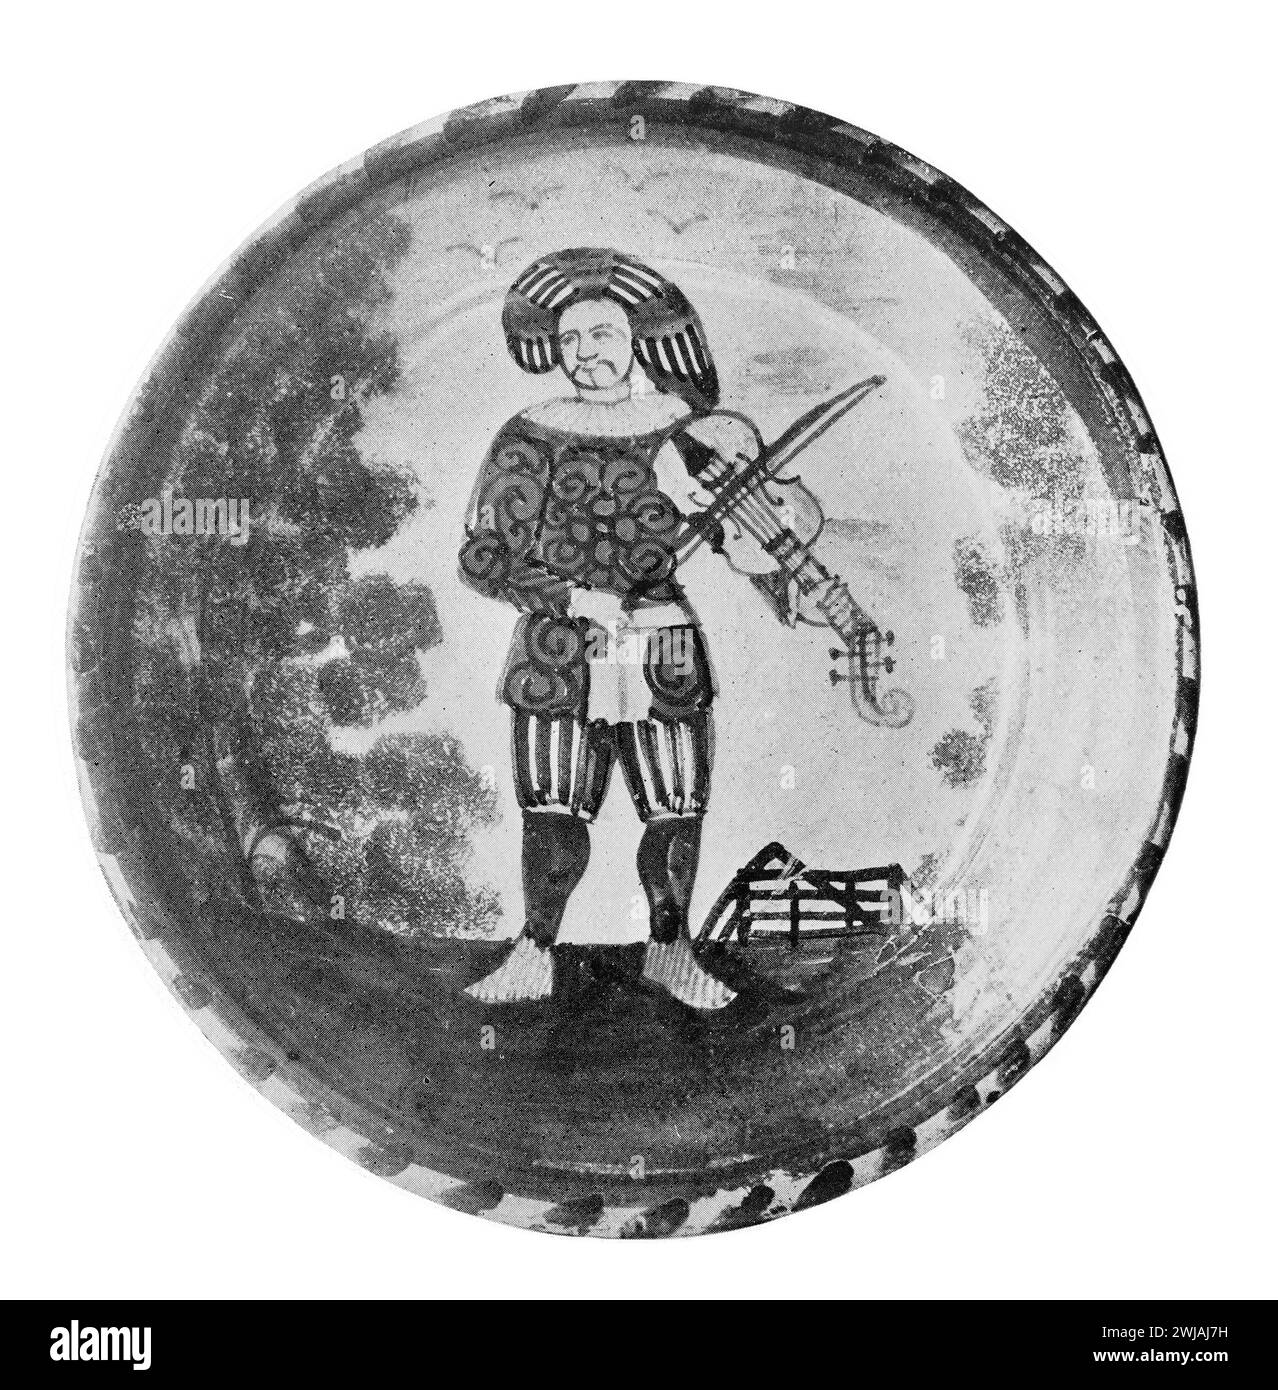 An old English Delft plate with a painting of Sir Thomas Killigrew, last of the court jesters. Black and White Illustration from the Connoisseur, an Illustrated Magazine for Collectors Voll 3 (May-Aug 1902) published in London. Stock Photo